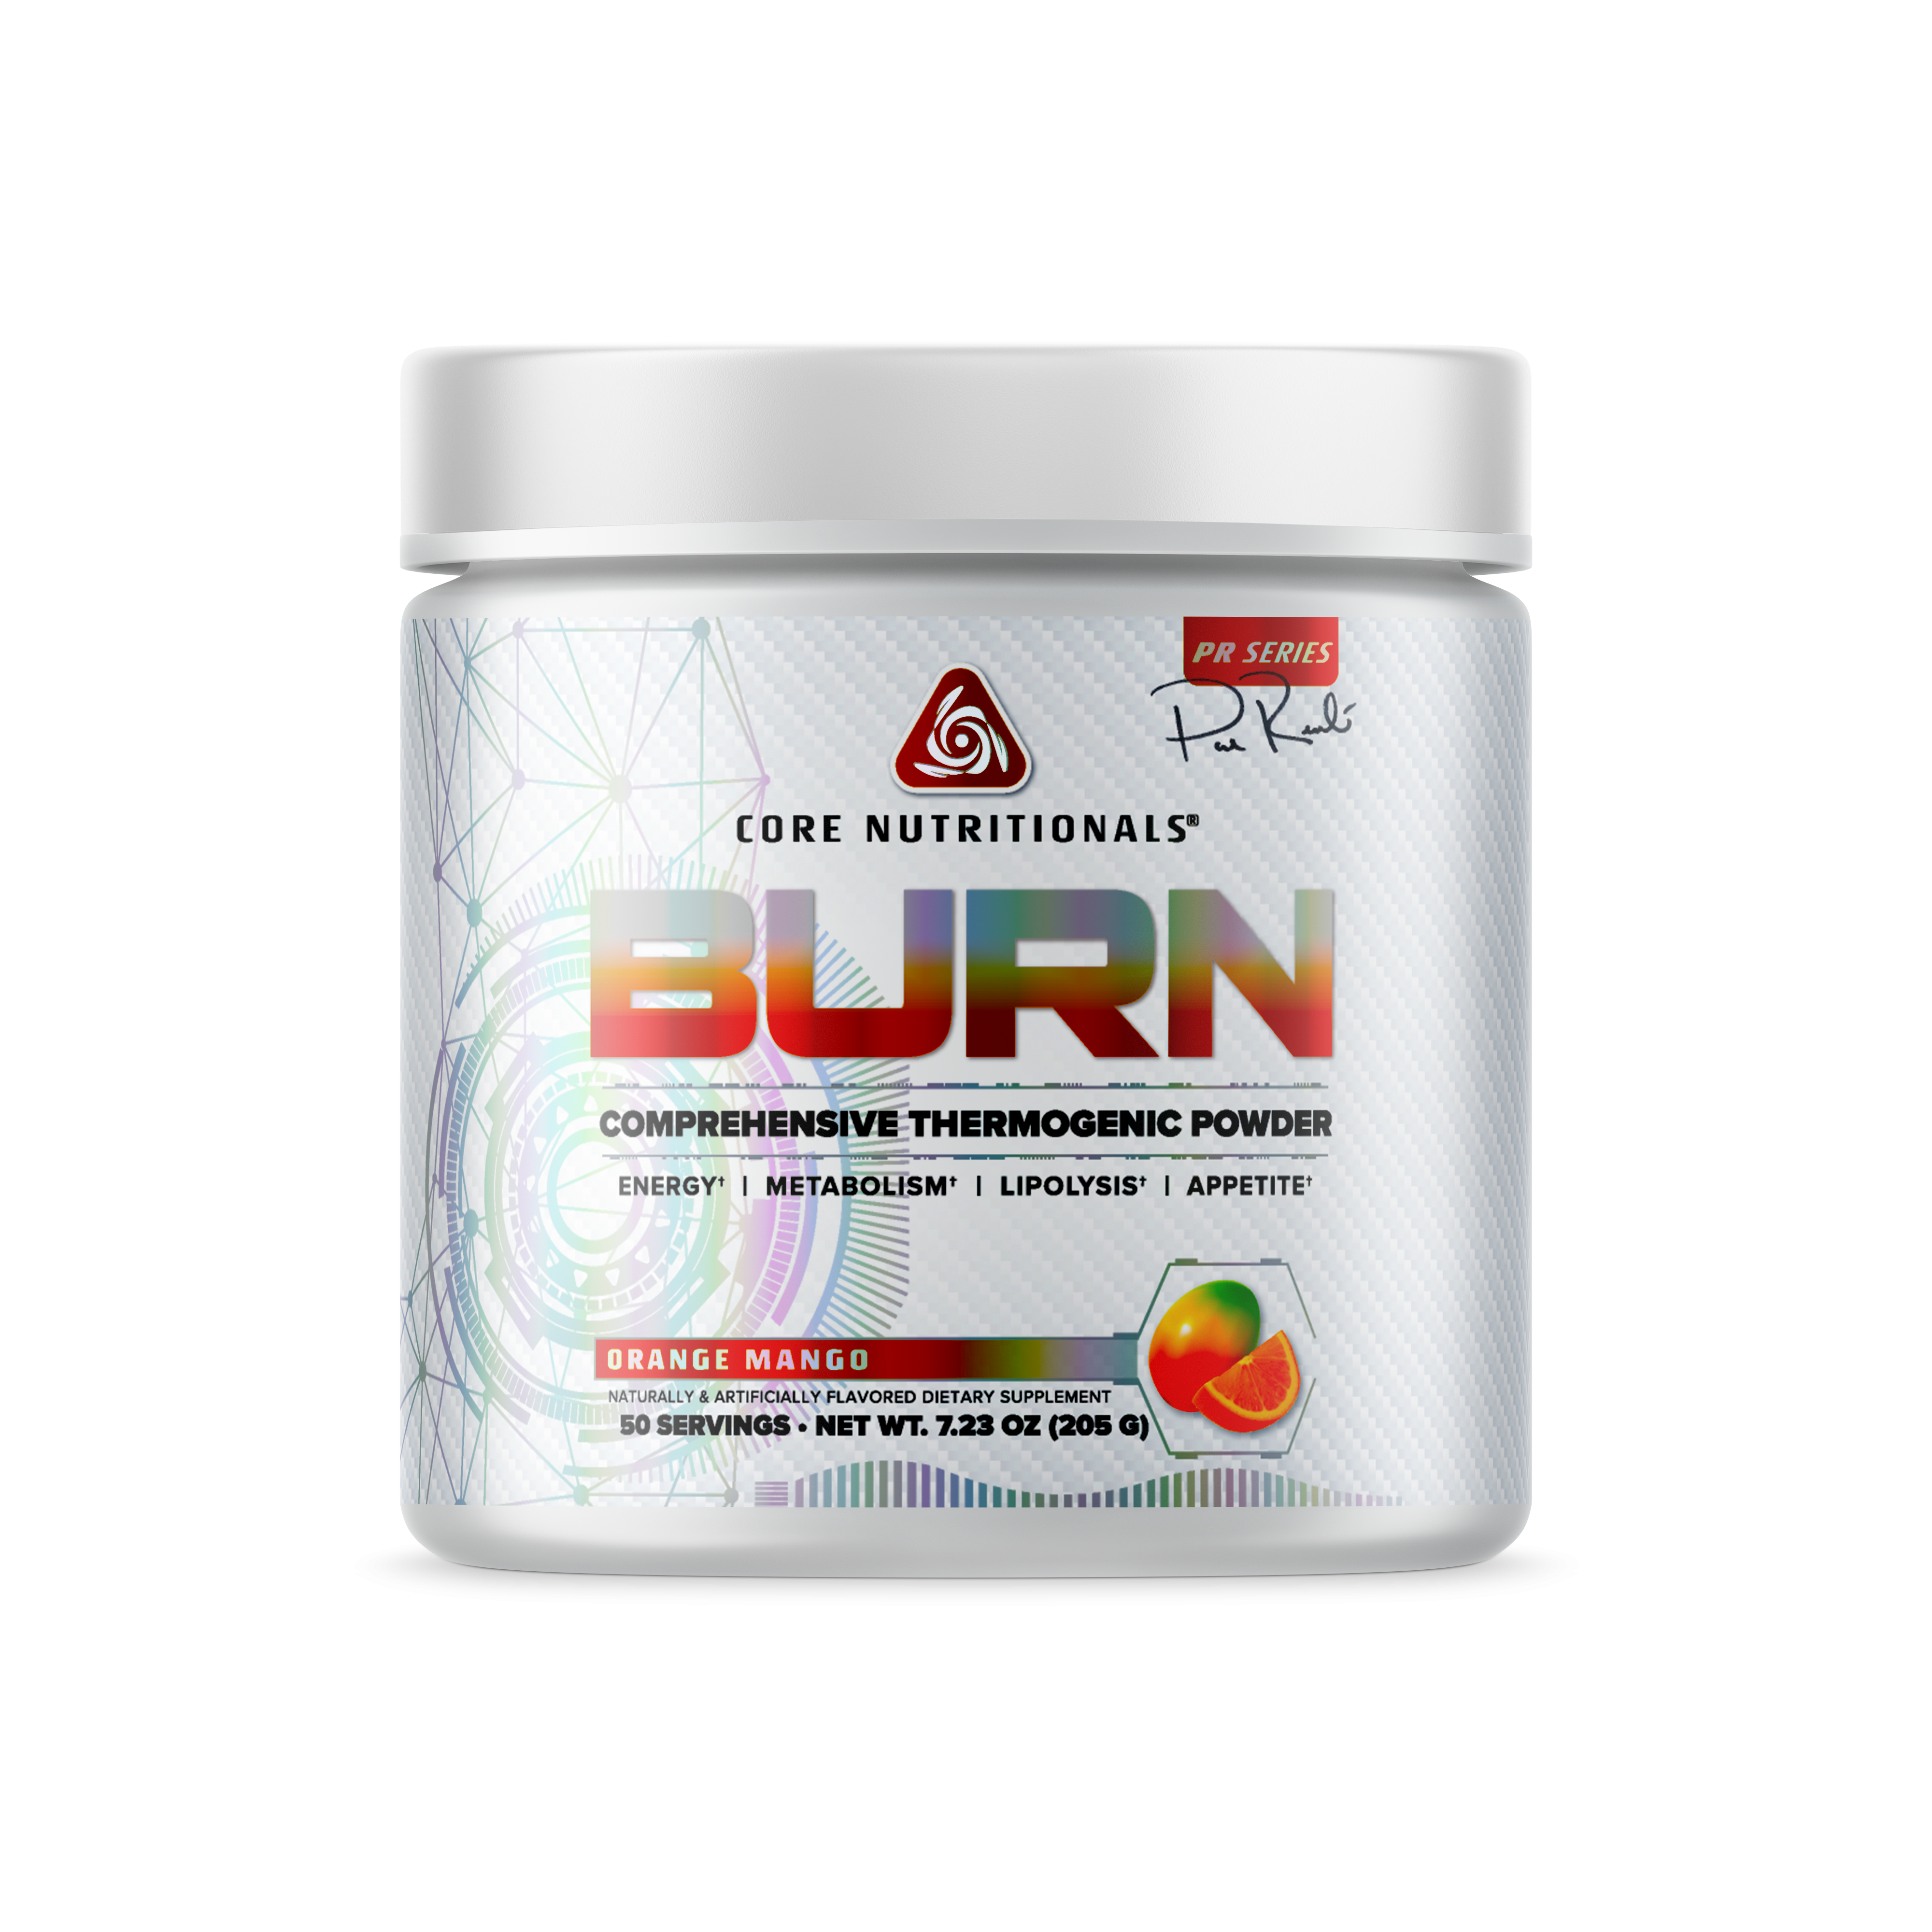 Core Nutritionals BURN – Fat Burner – Professional Supplements & Protein From A-list Nutrition